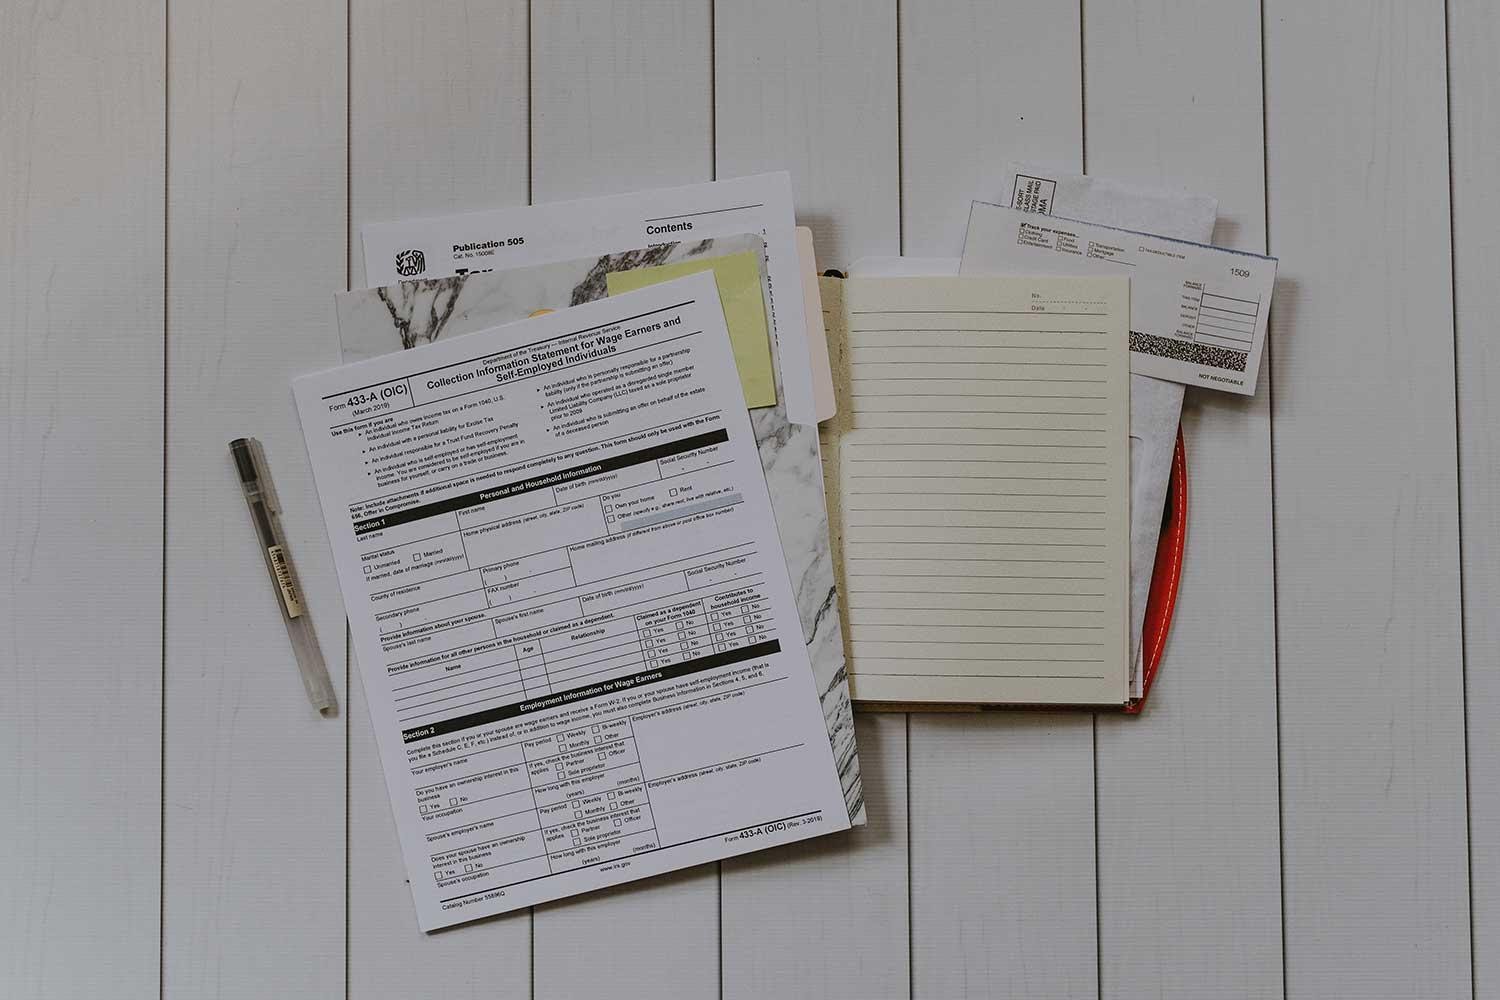 Construction paperwork organisation: Here's how to get organised now